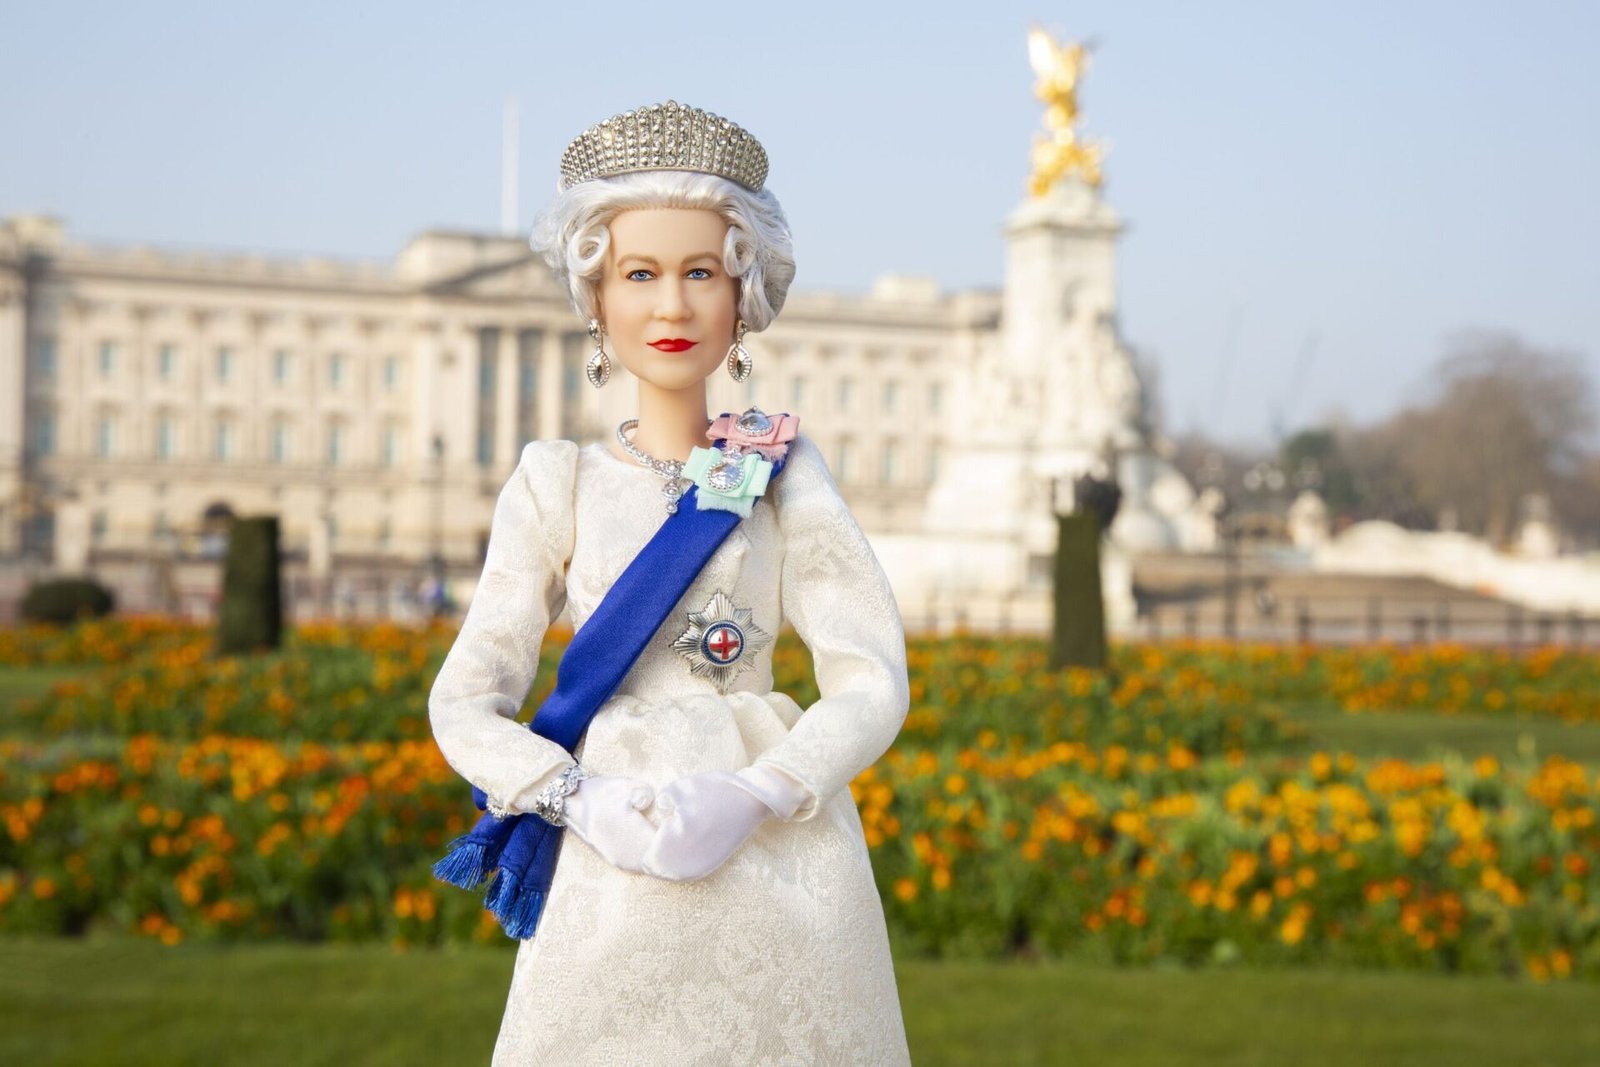 Check out the Barbie Queen Elizabeth Doll￼